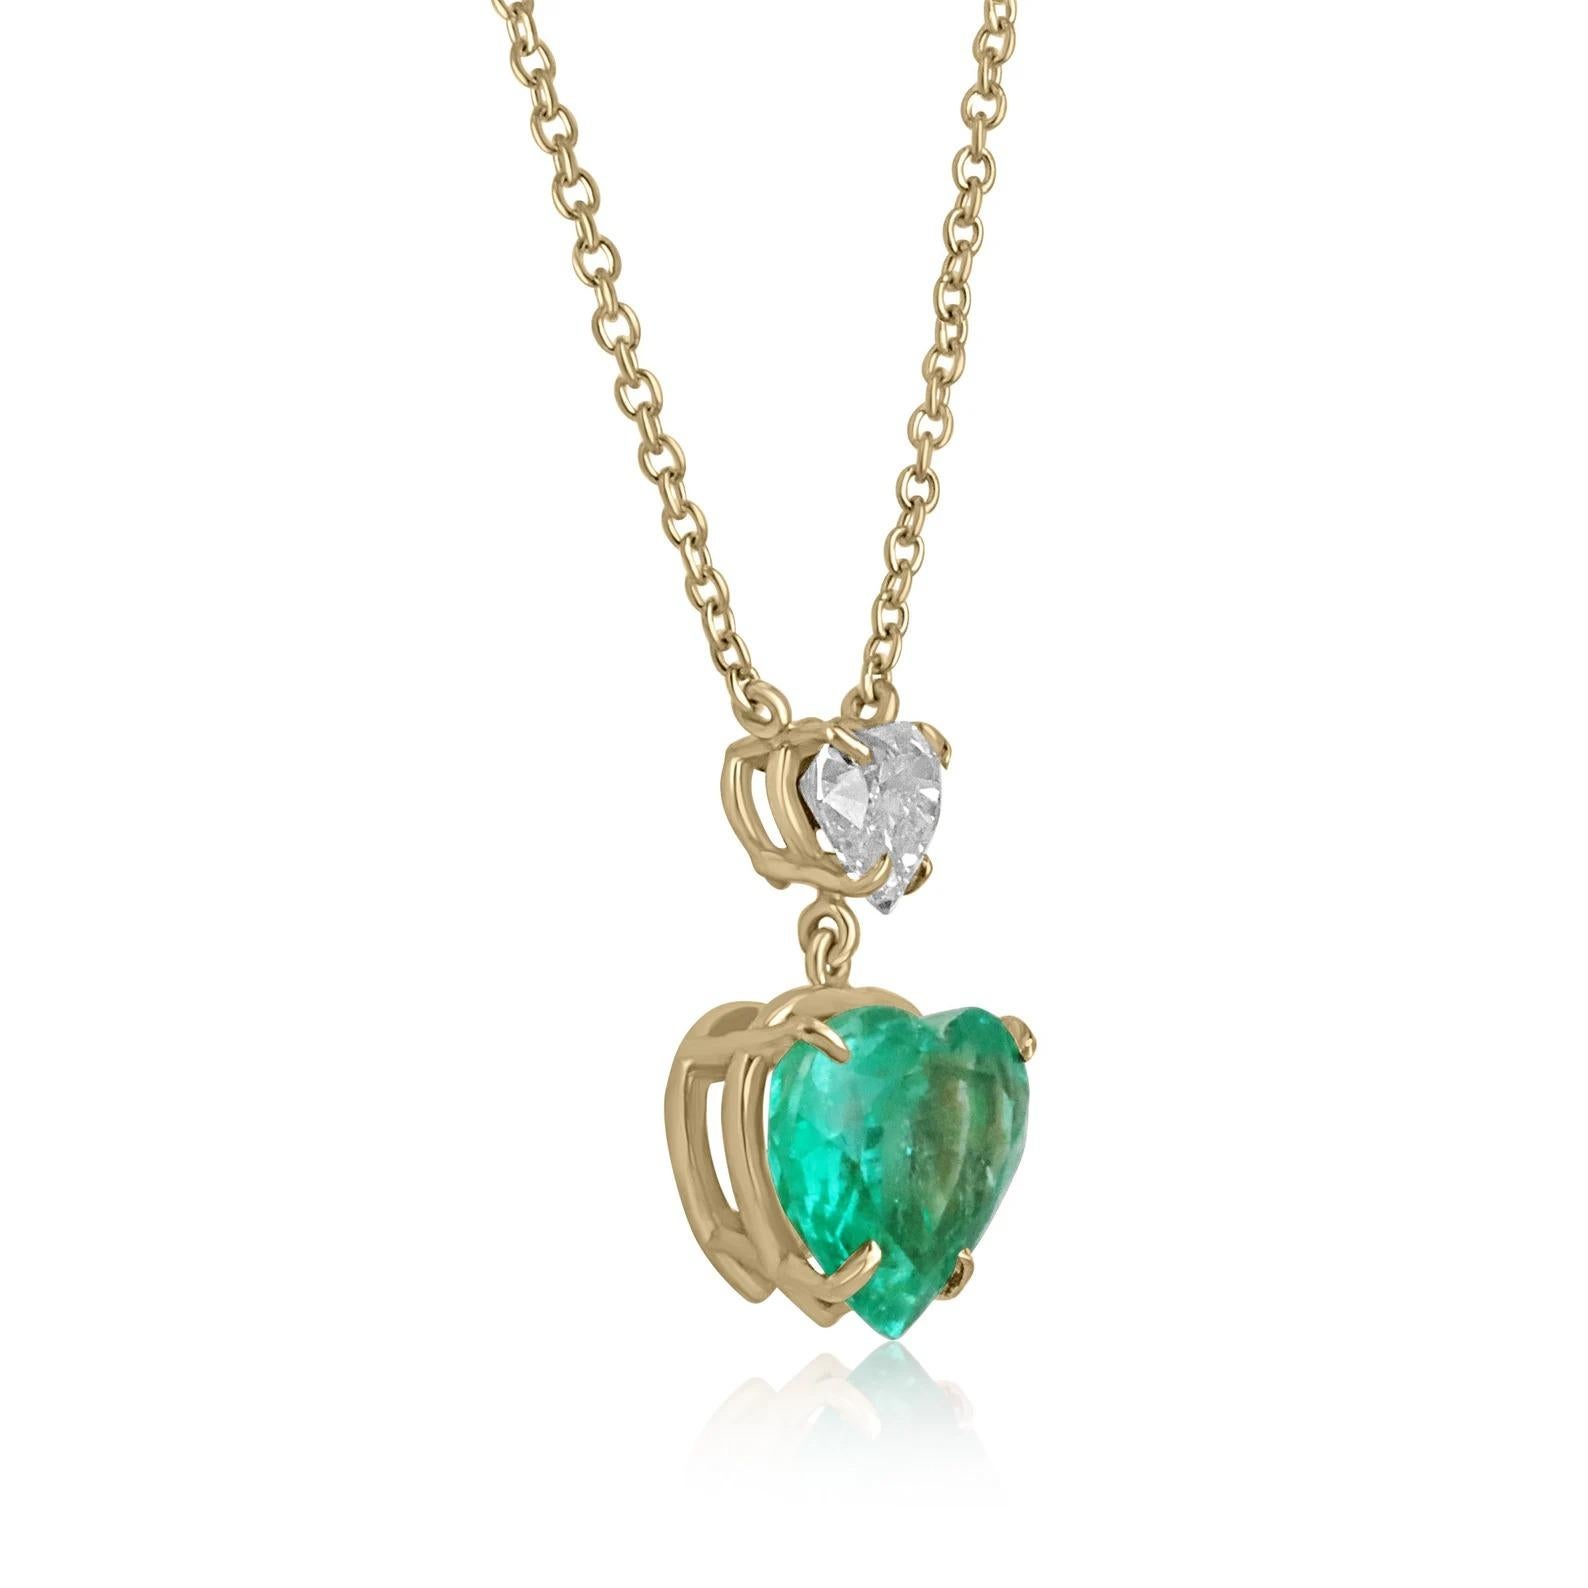 Take a look at this stunning fine quality top quality Colombian emerald heart and diamond heart necklace. The natural, Colombian emerald carries a full 3.40-carats, of vivid deep green color. The stone displays excellent luster and very good eye